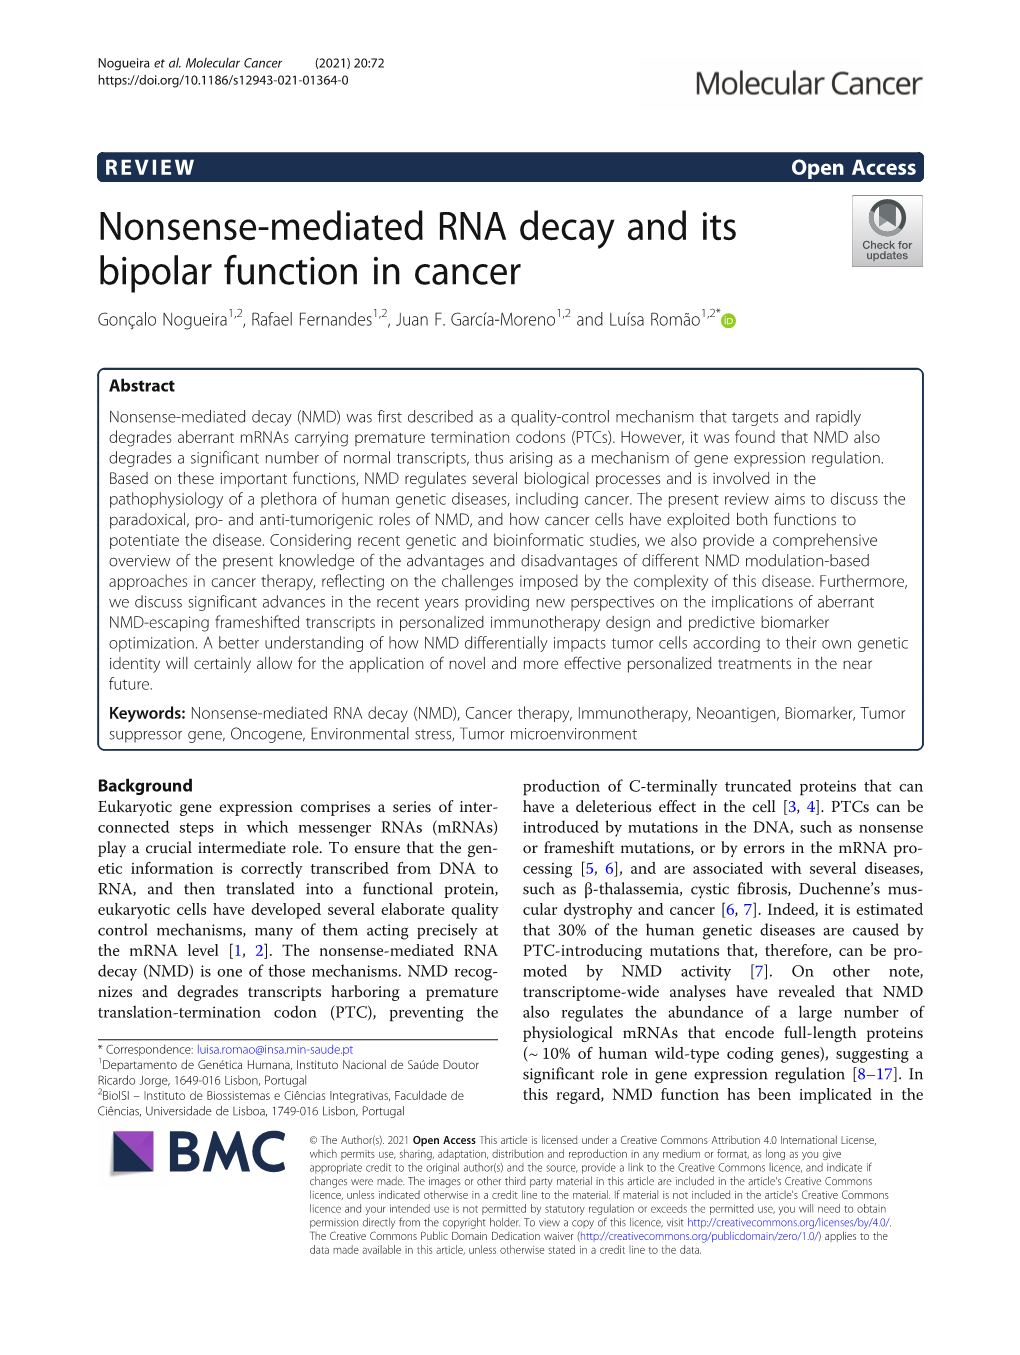 Nonsense-Mediated RNA Decay and Its Bipolar Function in Cancer Gonçalo Nogueira1,2, Rafael Fernandes1,2, Juan F